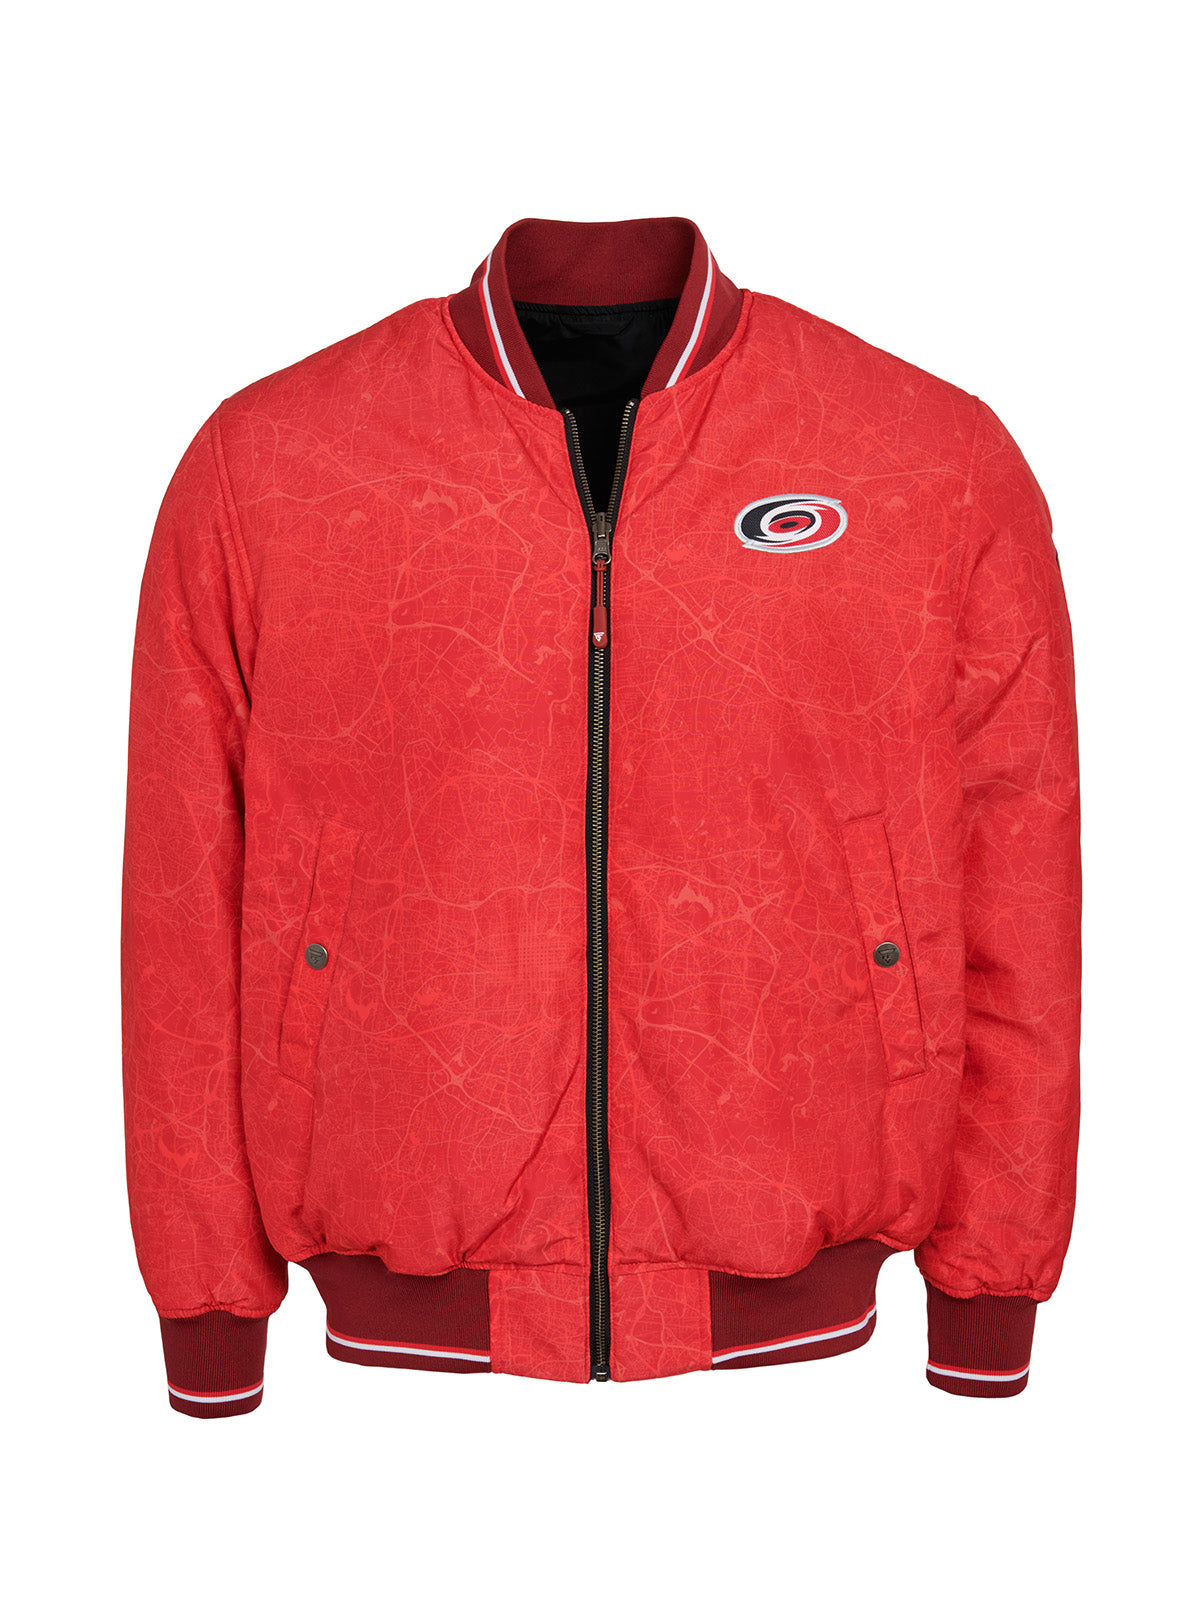 Carolina Hurricances Bomber - Reversible bomber jacket featuring the iconic Carolina Hurricanes logo with ribbed cuffs, collar and hem in the team colors